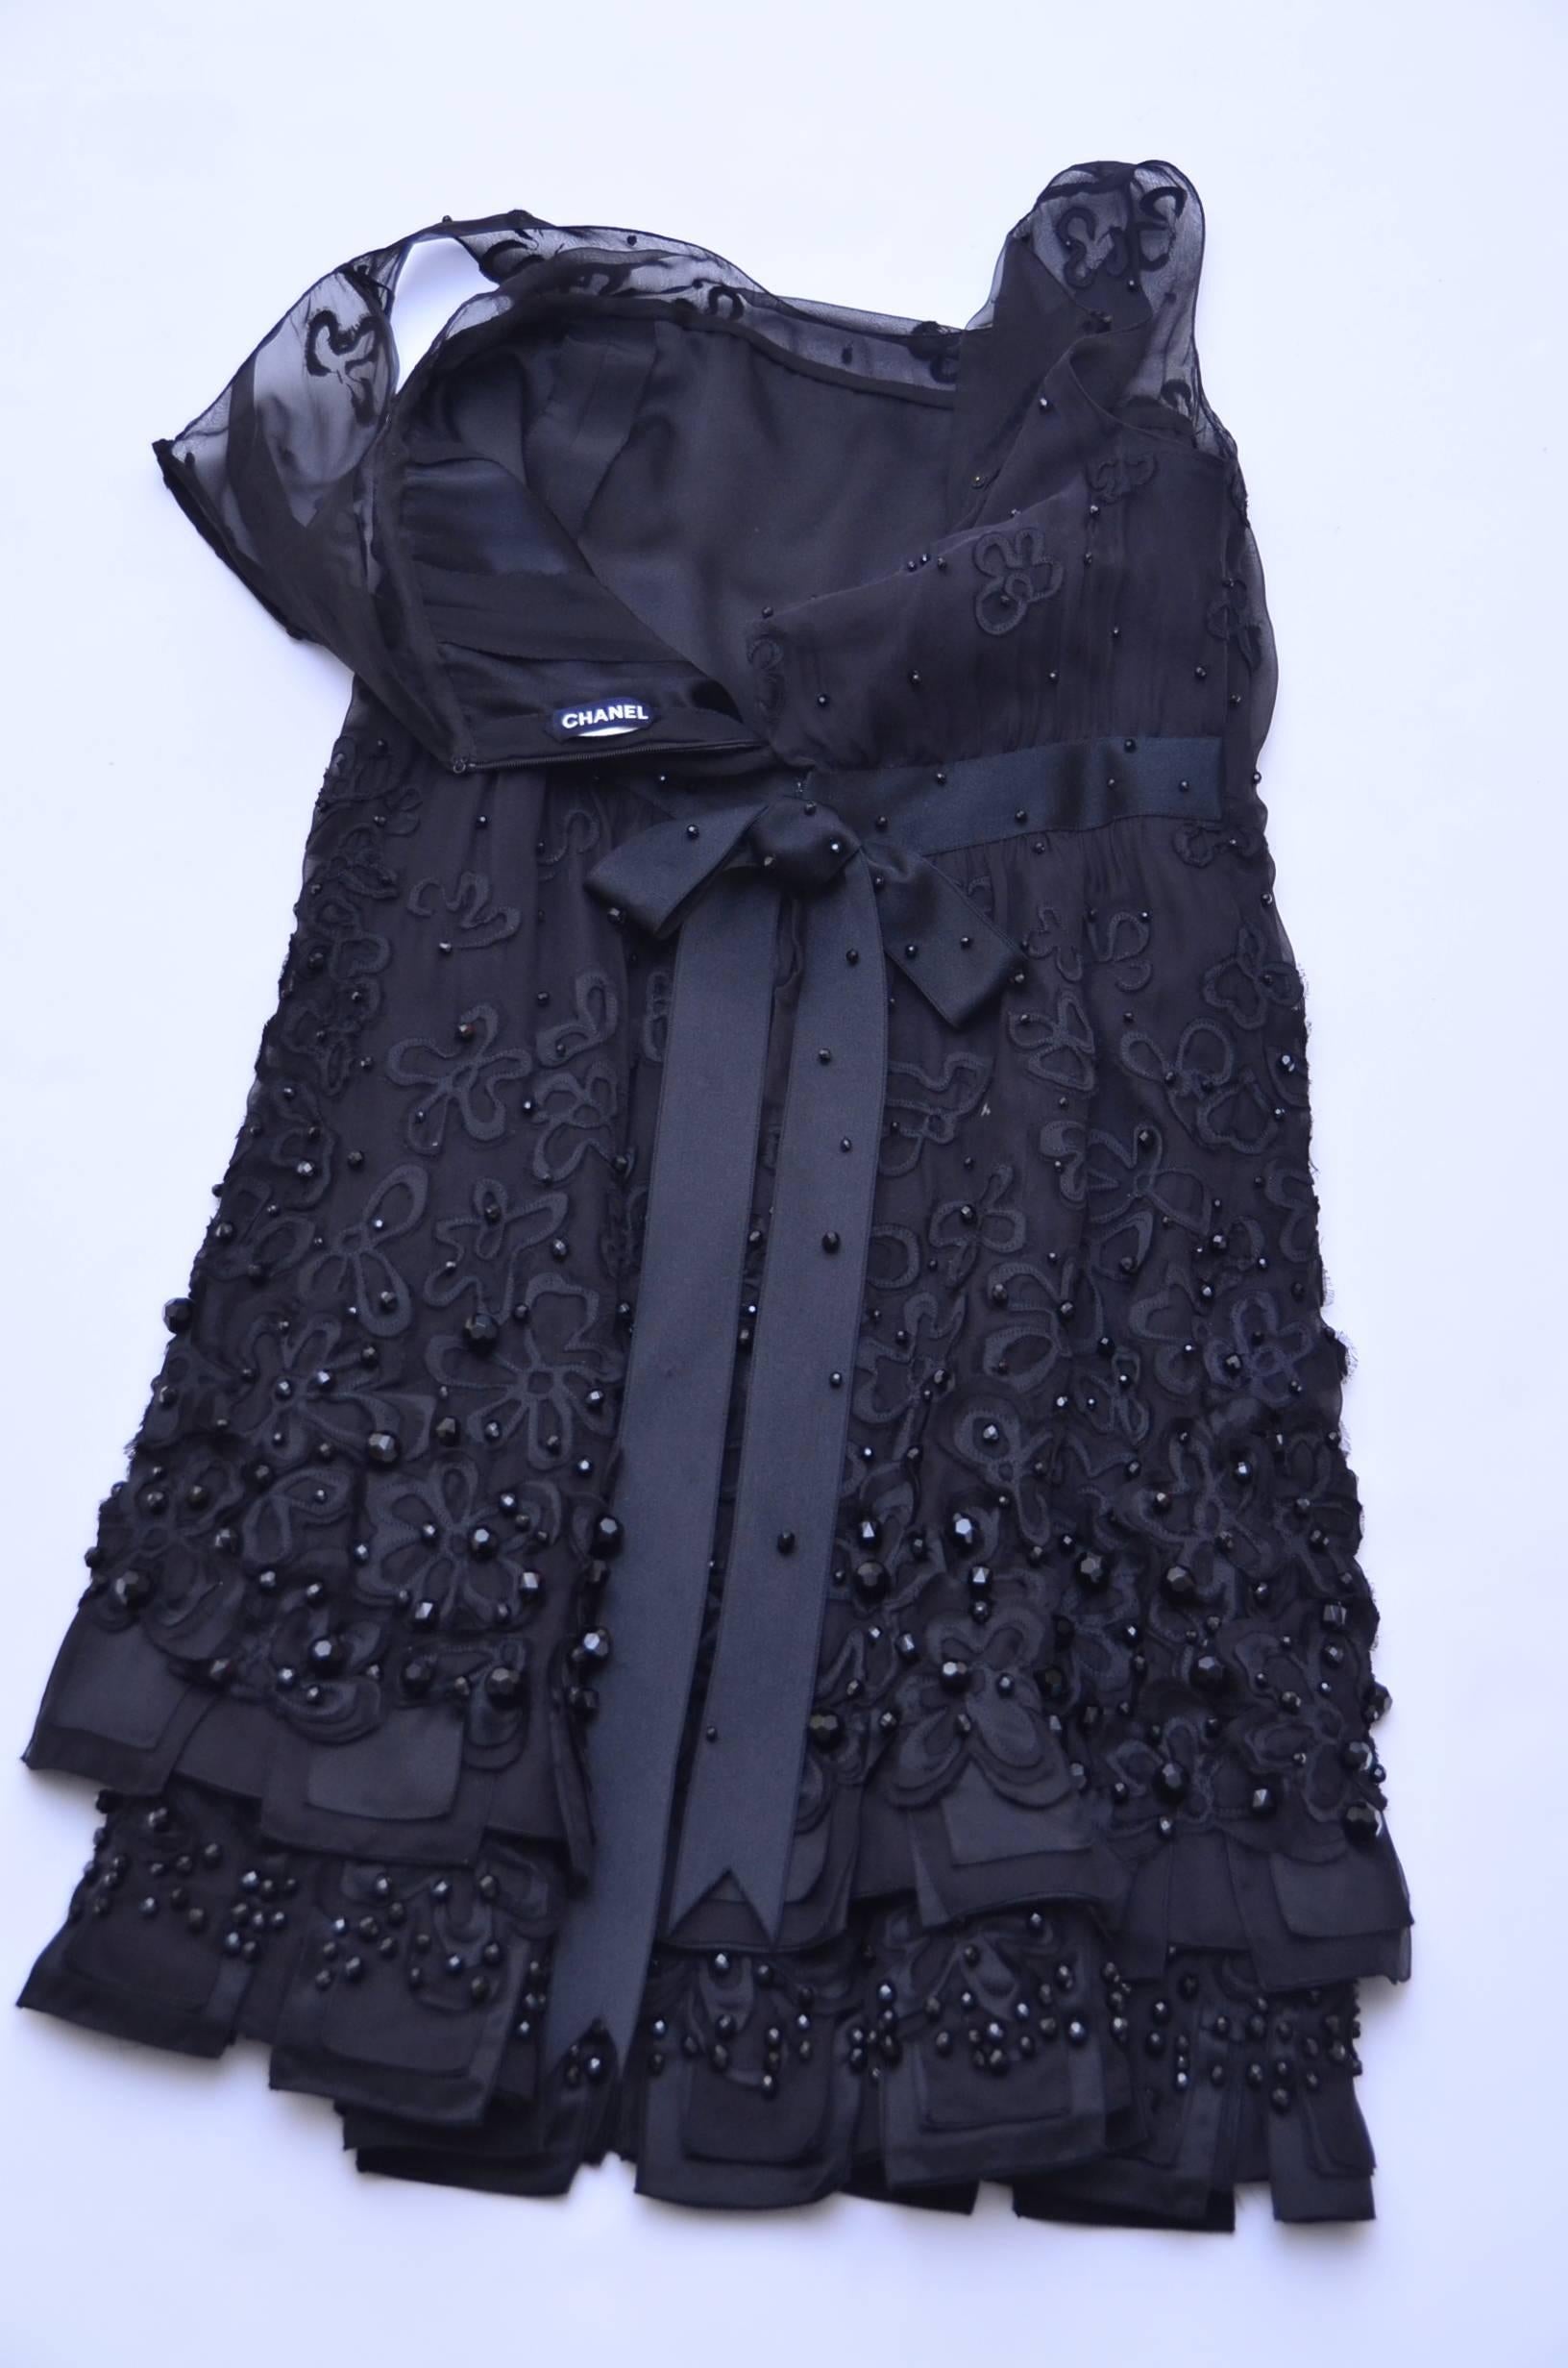 CHANEL Haute Couture Black Silk Embellished  Dress With Bow  Beautiful..... 5